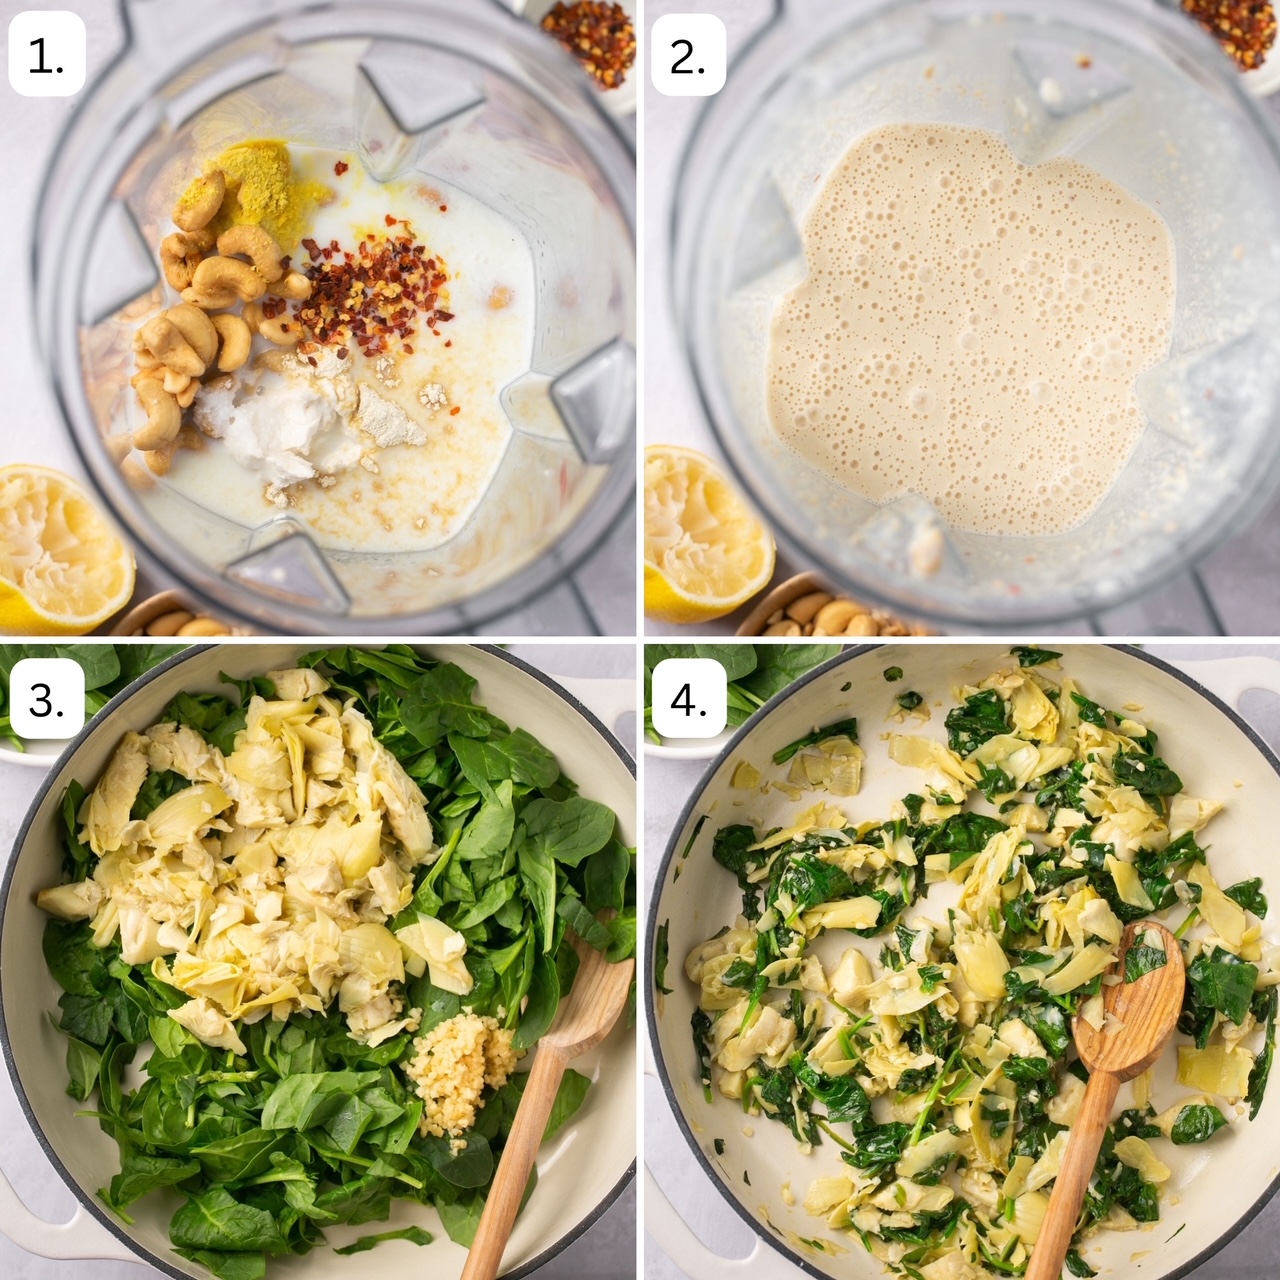 numbered step by step photos showing how to make this recipe